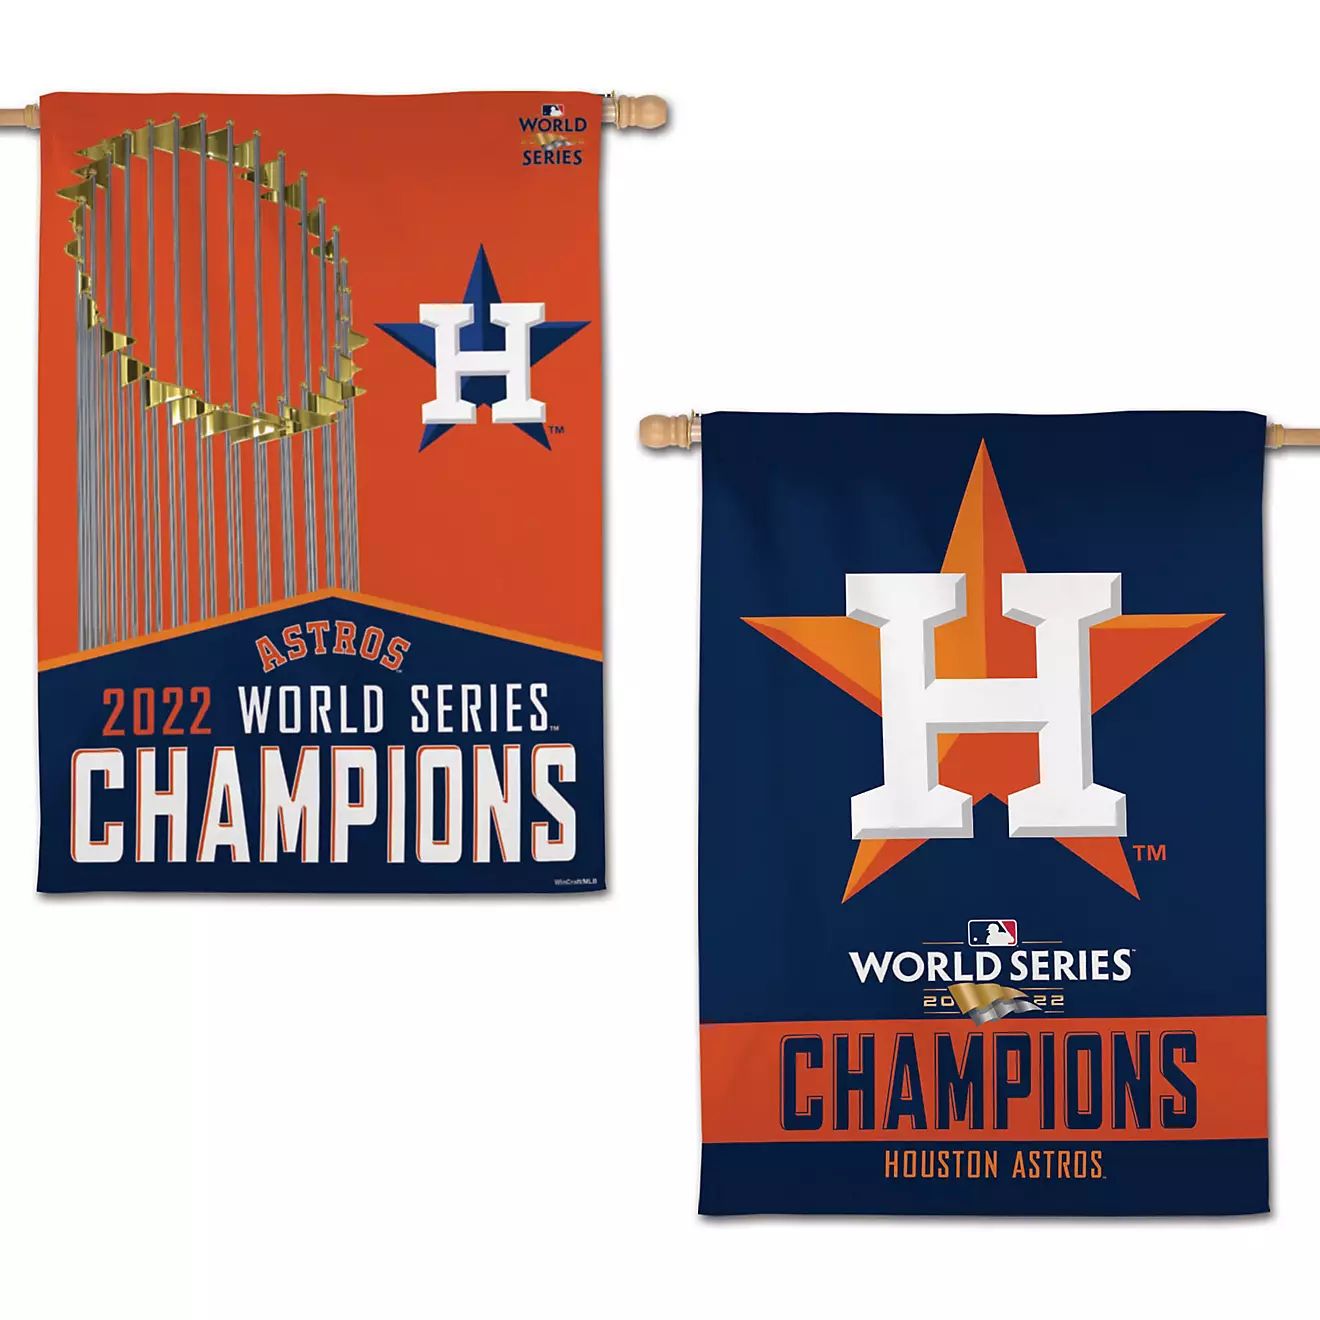 WinCraft Houston Astros 2022 World Series Champs 28"x40" Banner | Academy | Academy Sports + Outdoors